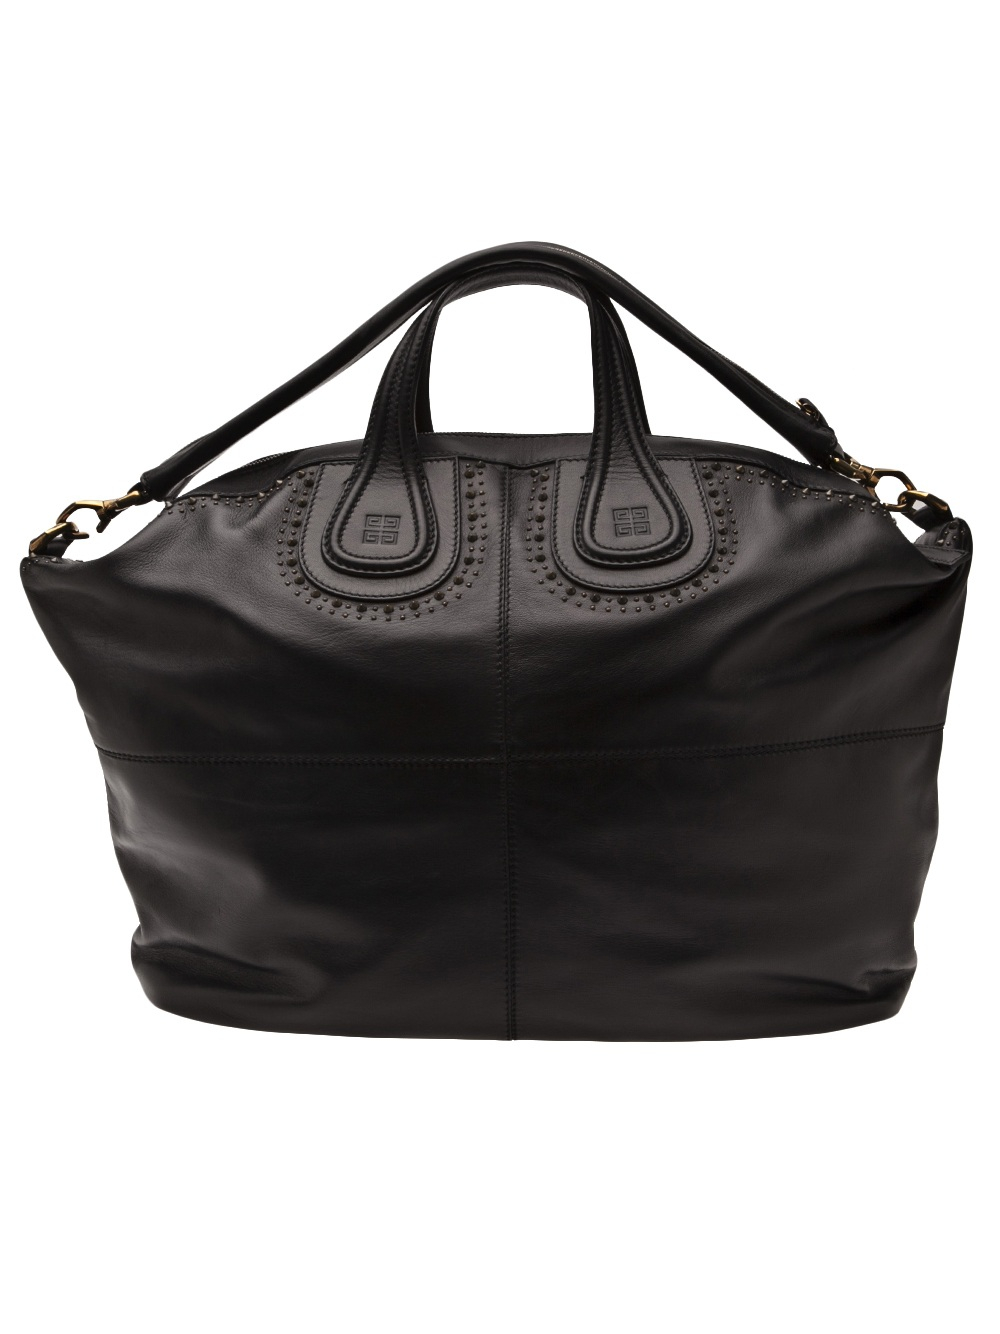 Givenchy Nightingale Large Bag in Black | Lyst